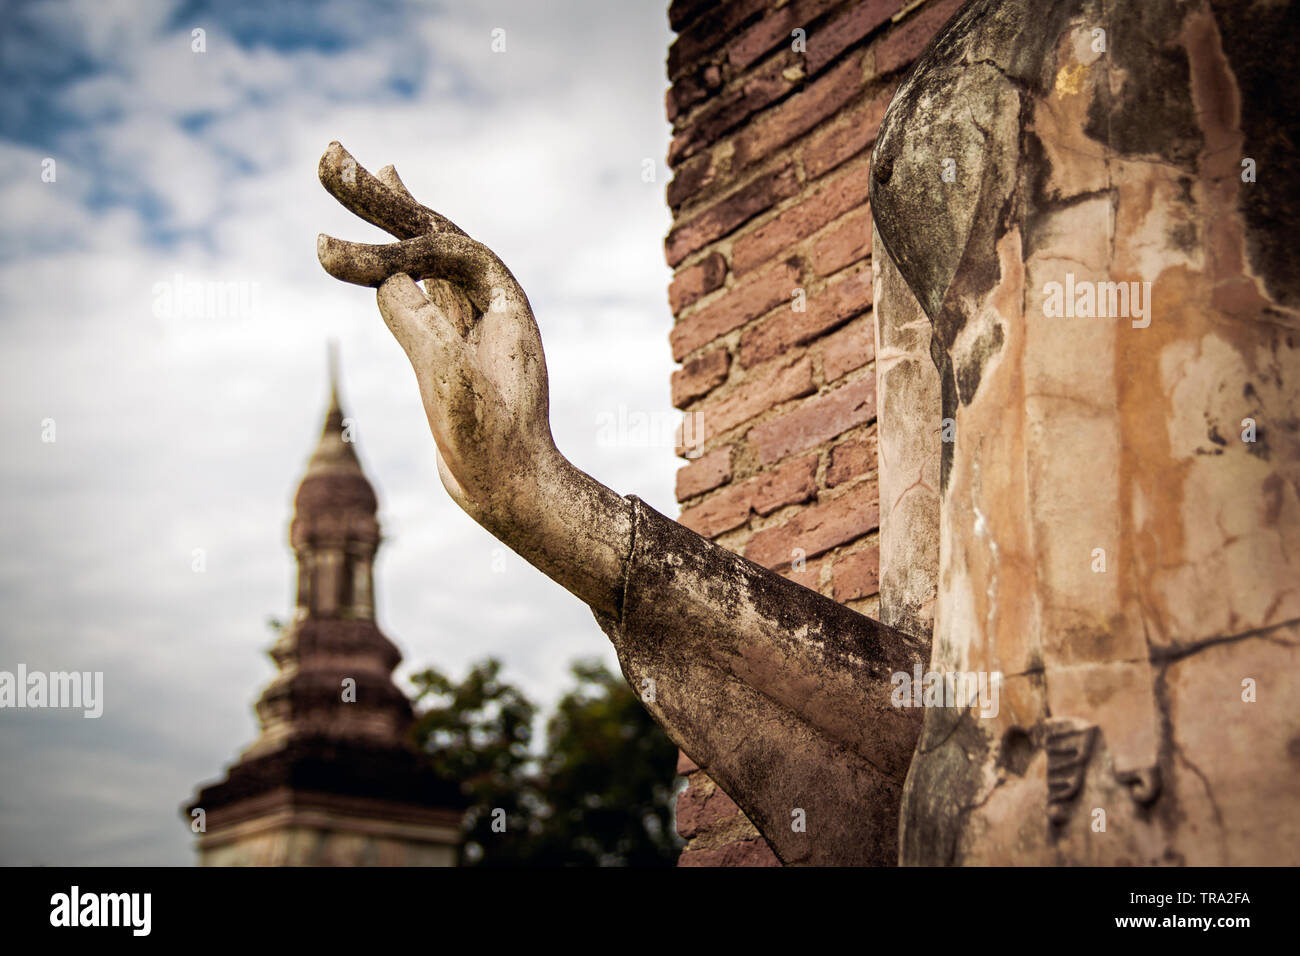 Buddha statue in Sukhothai Historical Park with fingers in spiritual mudra gesture seemingly touching the spire of an ancient stupa in the background Stock Photo